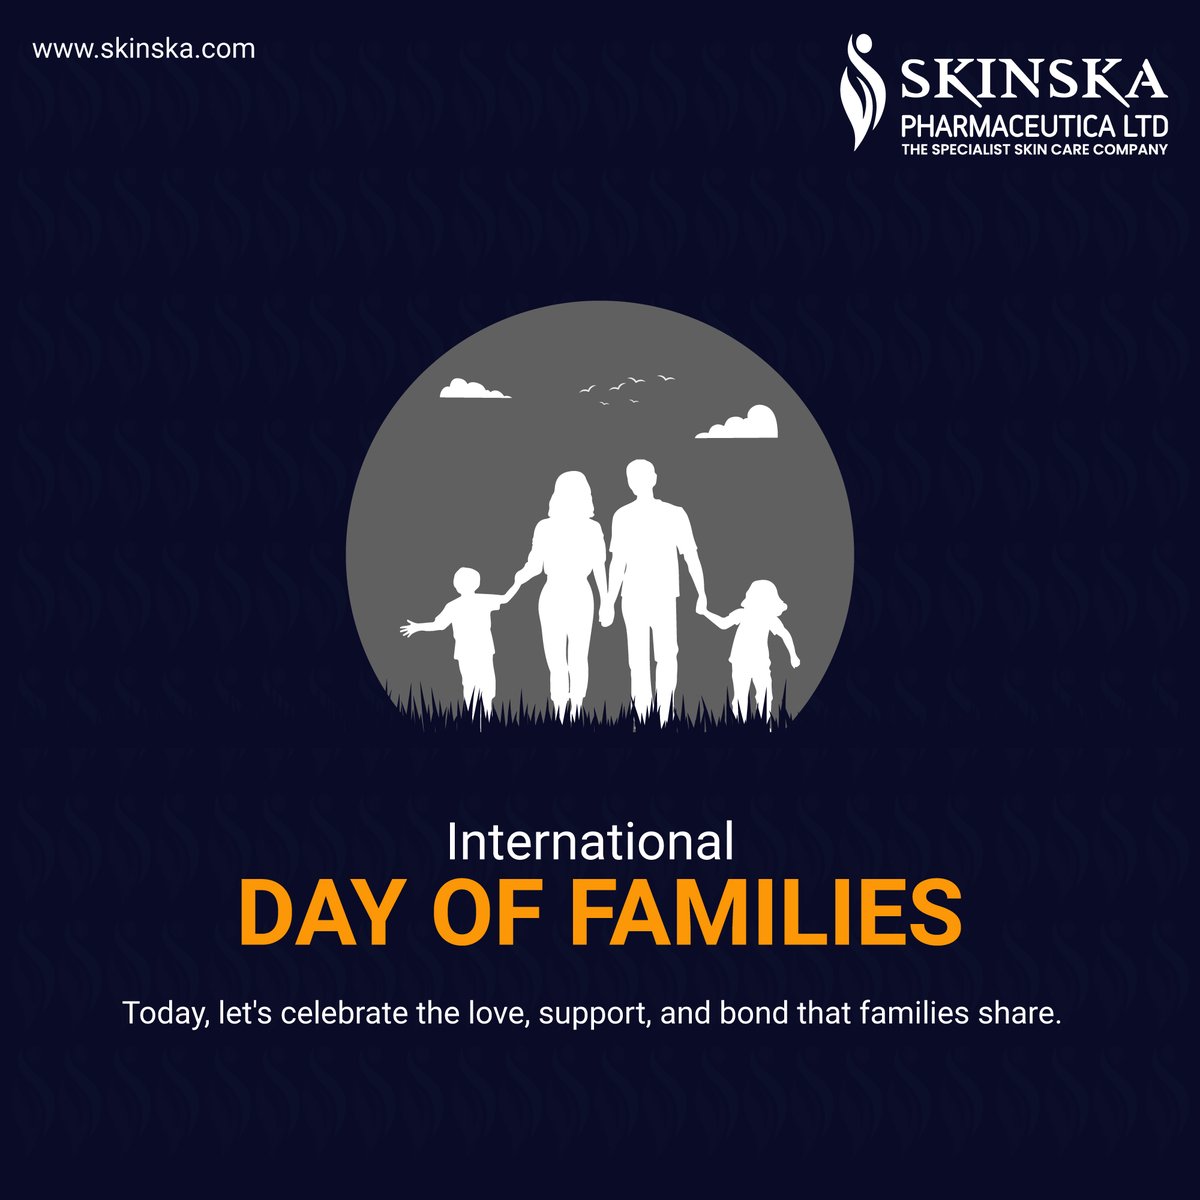 International Day of Families! #family #families #happyfamily #internationaldayoffamilies #dayoffamily #familiesday #familiesday2024 #internationaldayoffamilies2024 #familyday #familyday2024 #skinska #skincare #skincareproducts #indianskincare #indianskincarebrand #skincarebrand